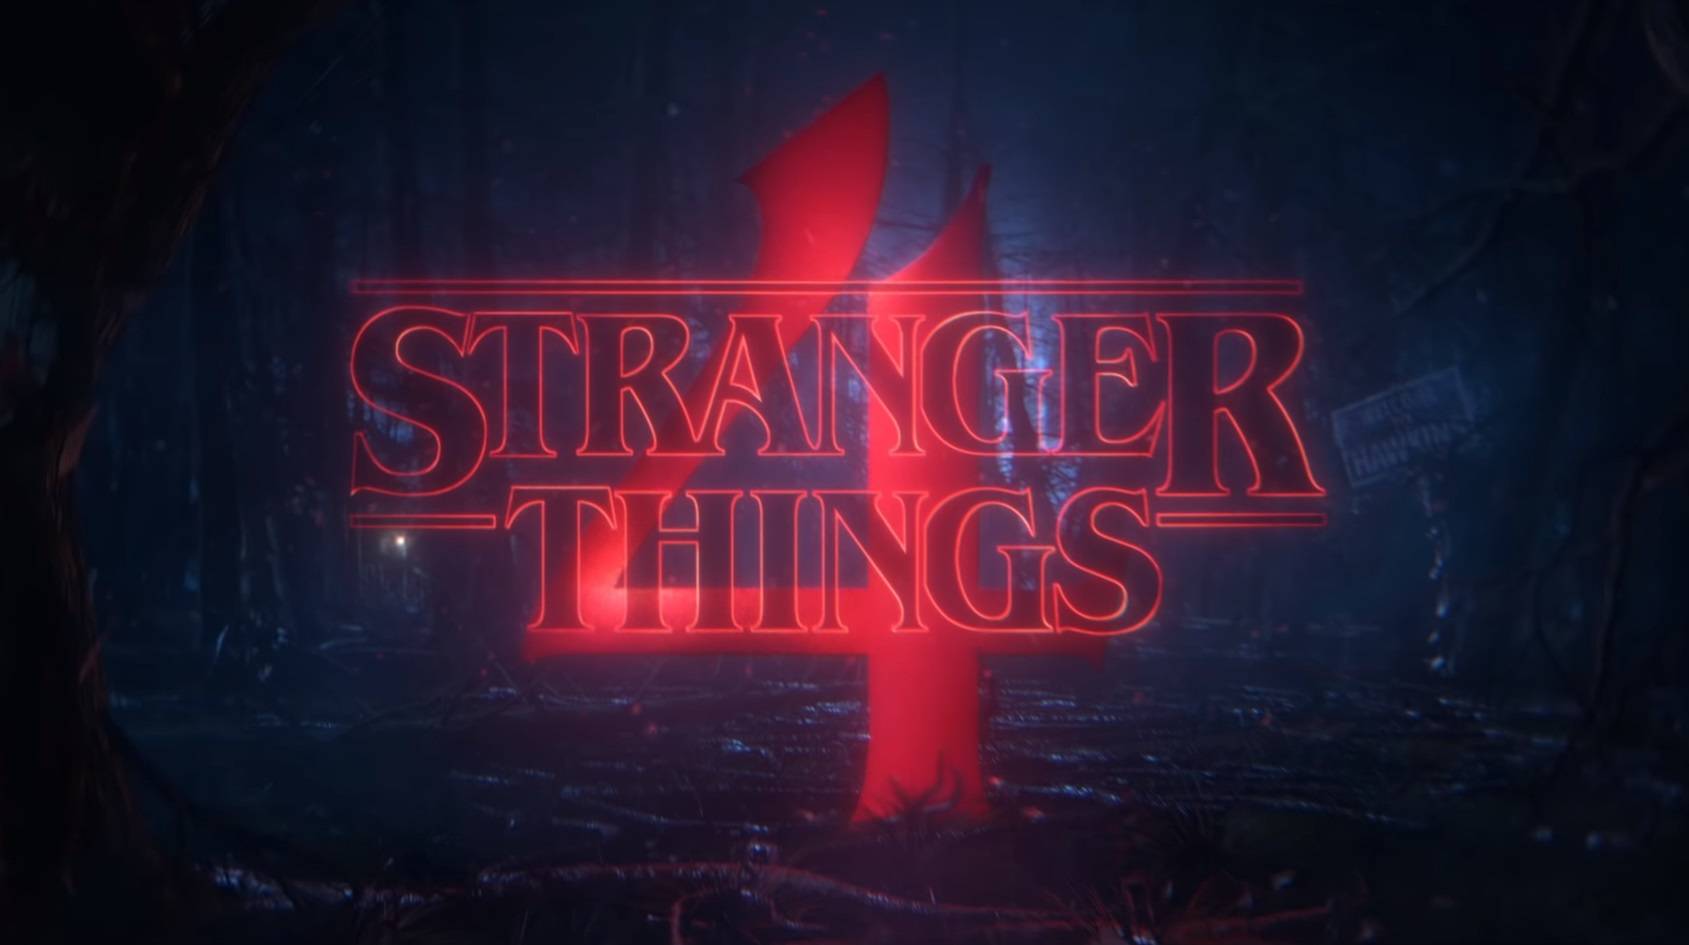 The ending of ‘Stranger Things’ has already been decided